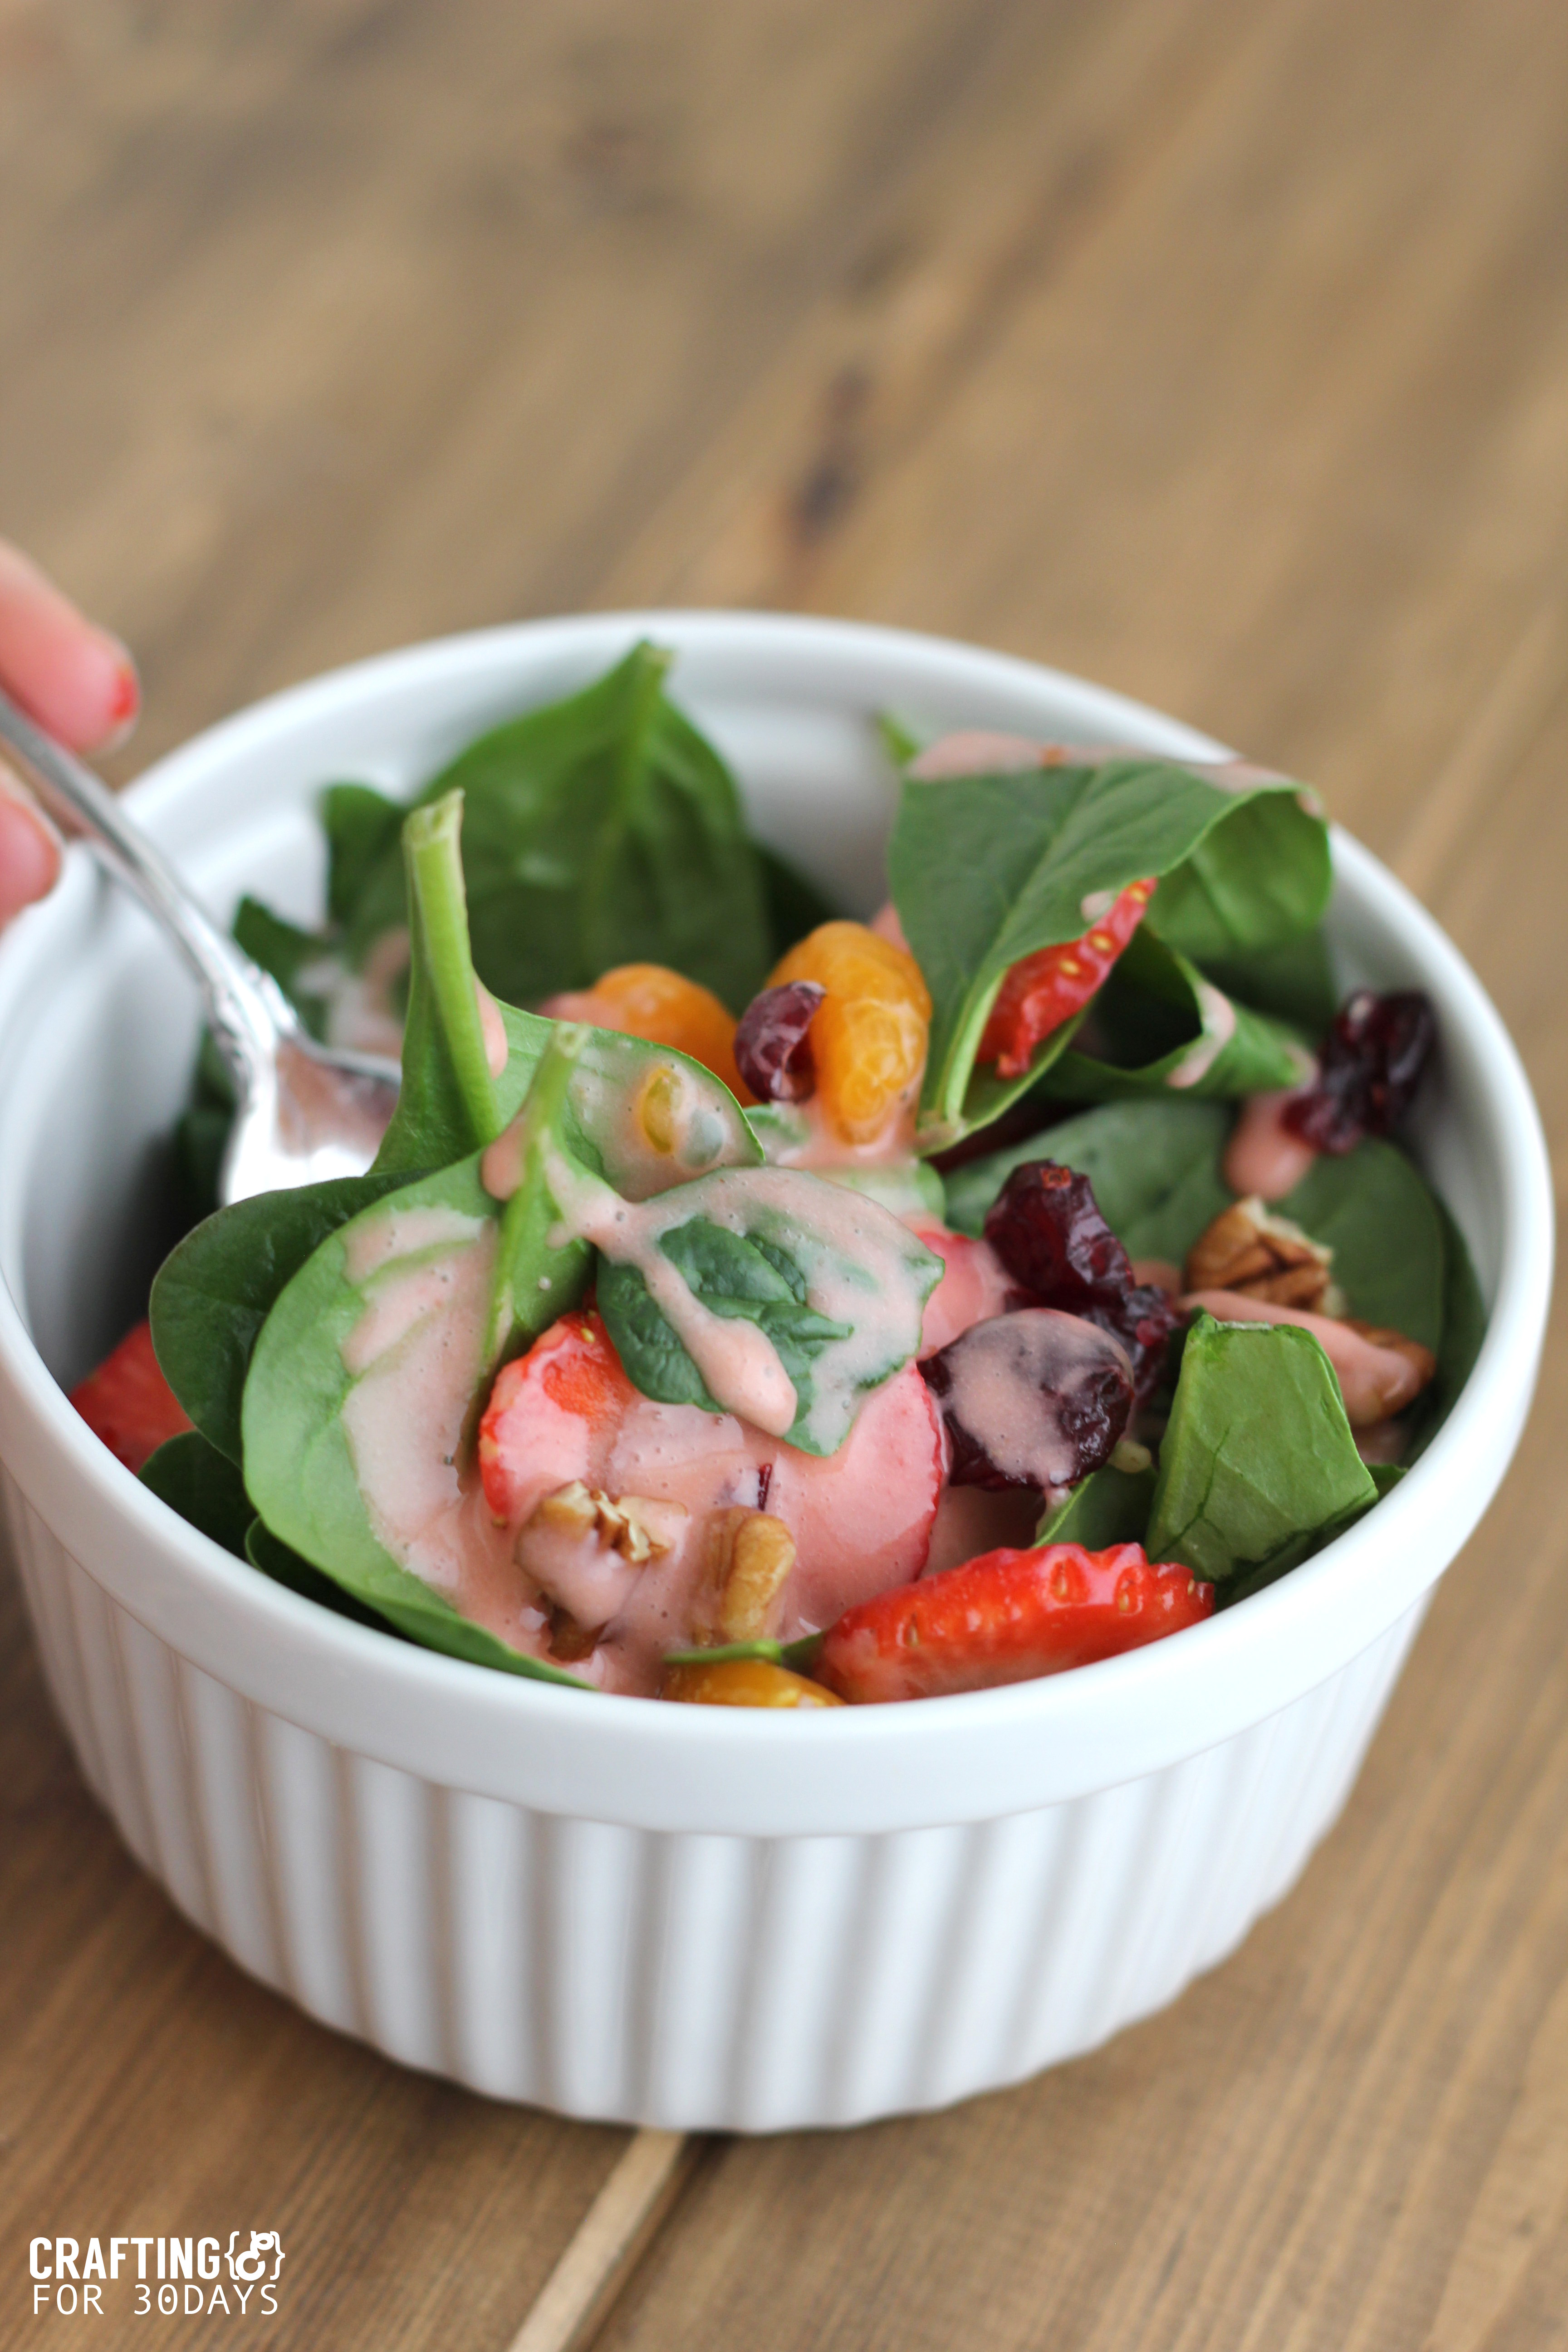 Spinach Strawberry Salad- an awesomely delicious and healthy option for the new year! From CraftingE